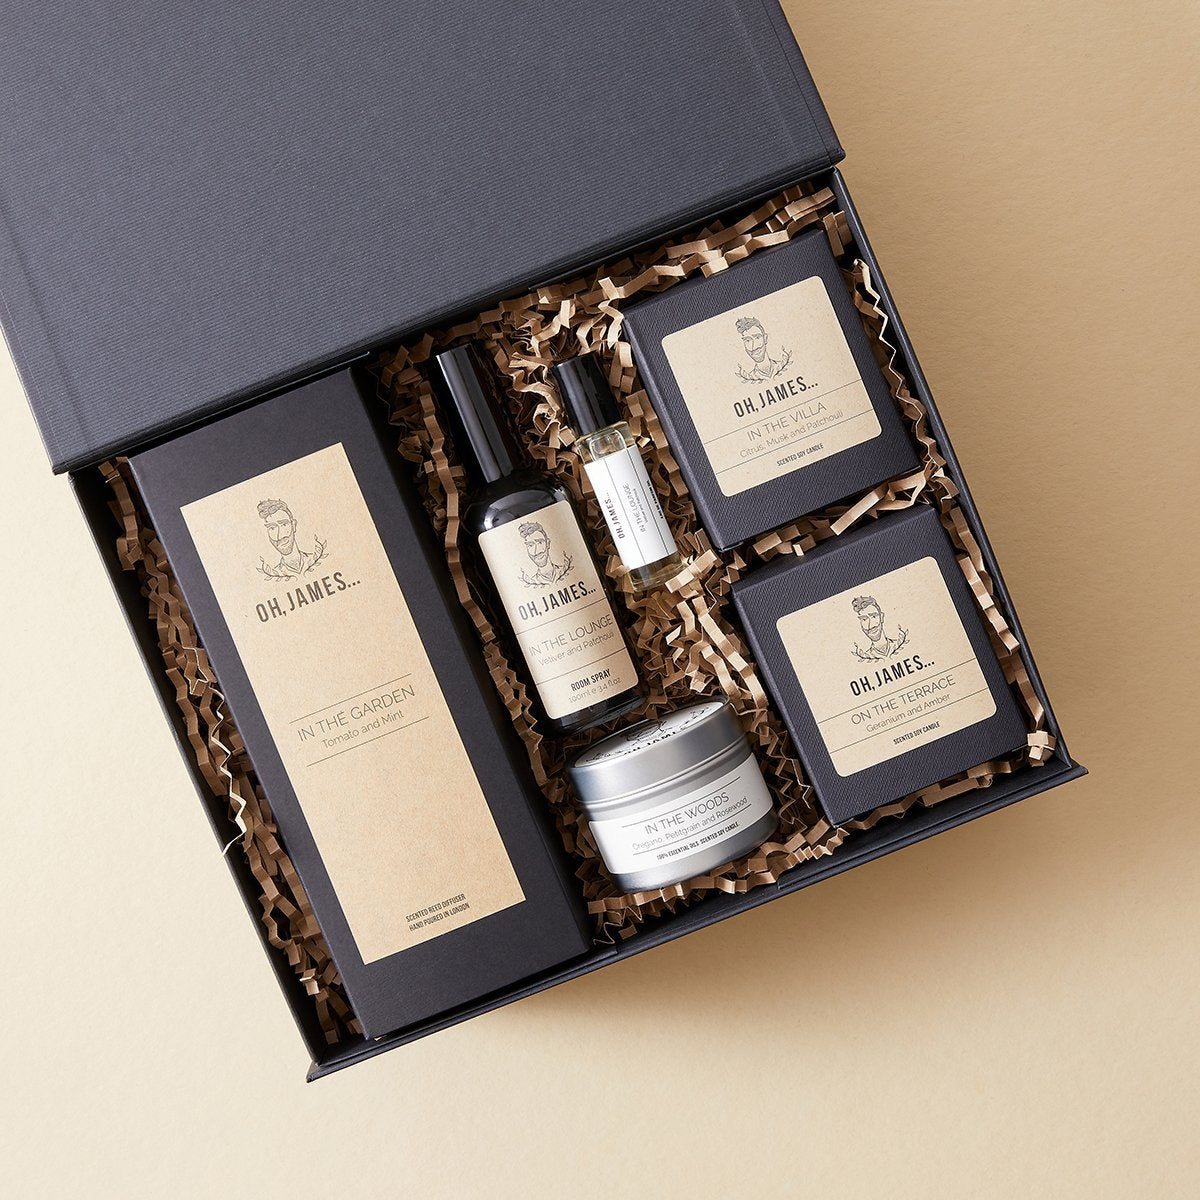 The 'Lover' Gift Set